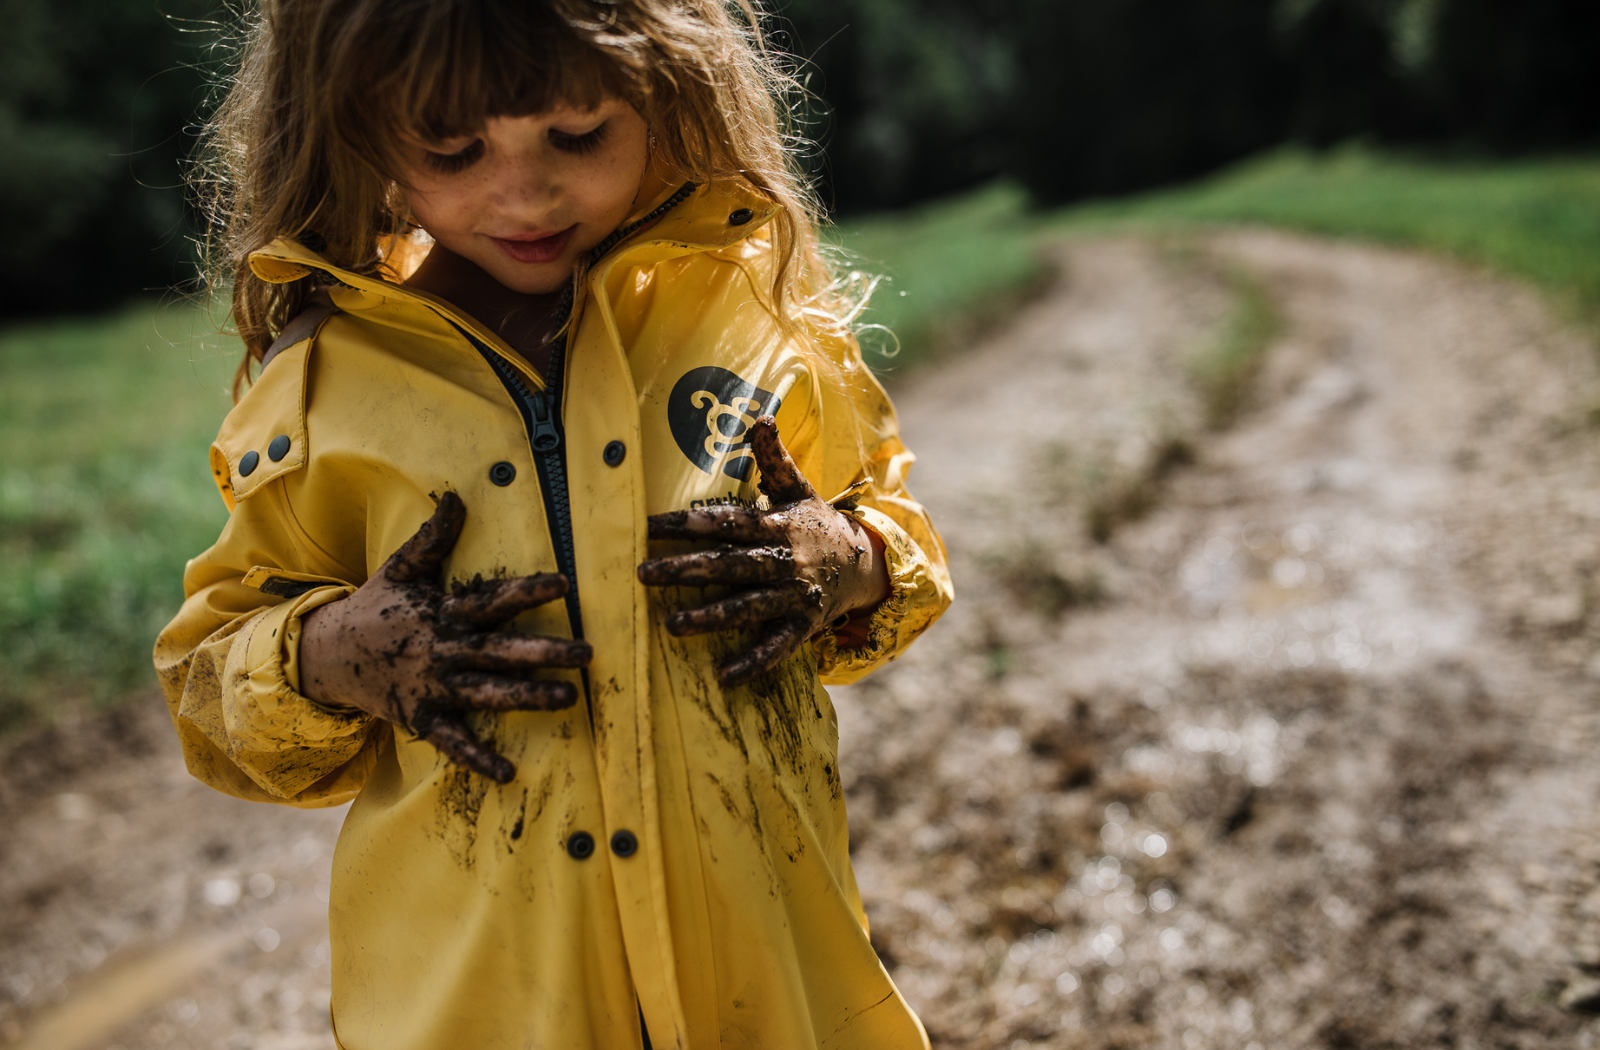 Brown haired toddler girl wiping her muddy hands on her waterproof sunshine yellow puddle suit